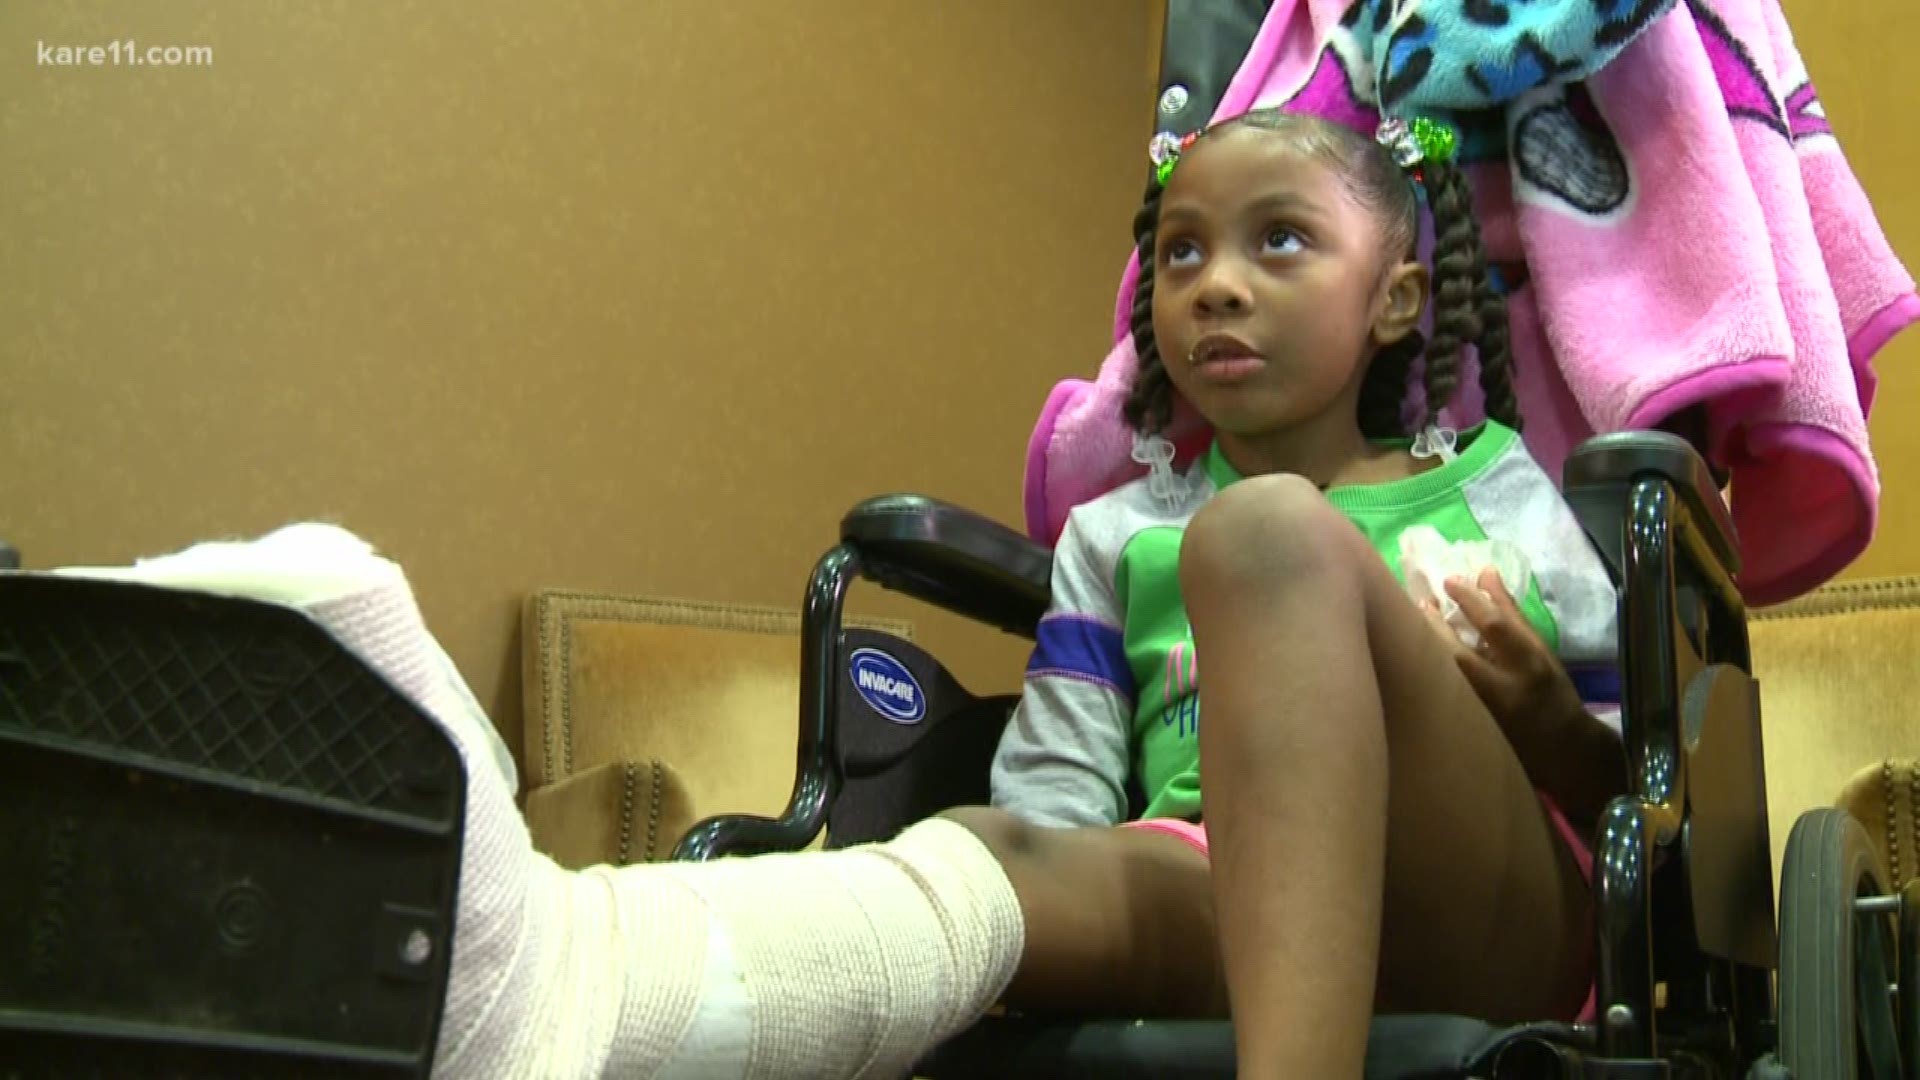 We're hearing for the first time from a 5-year-old girl hit by a stray bullet while sleeping in her bed.